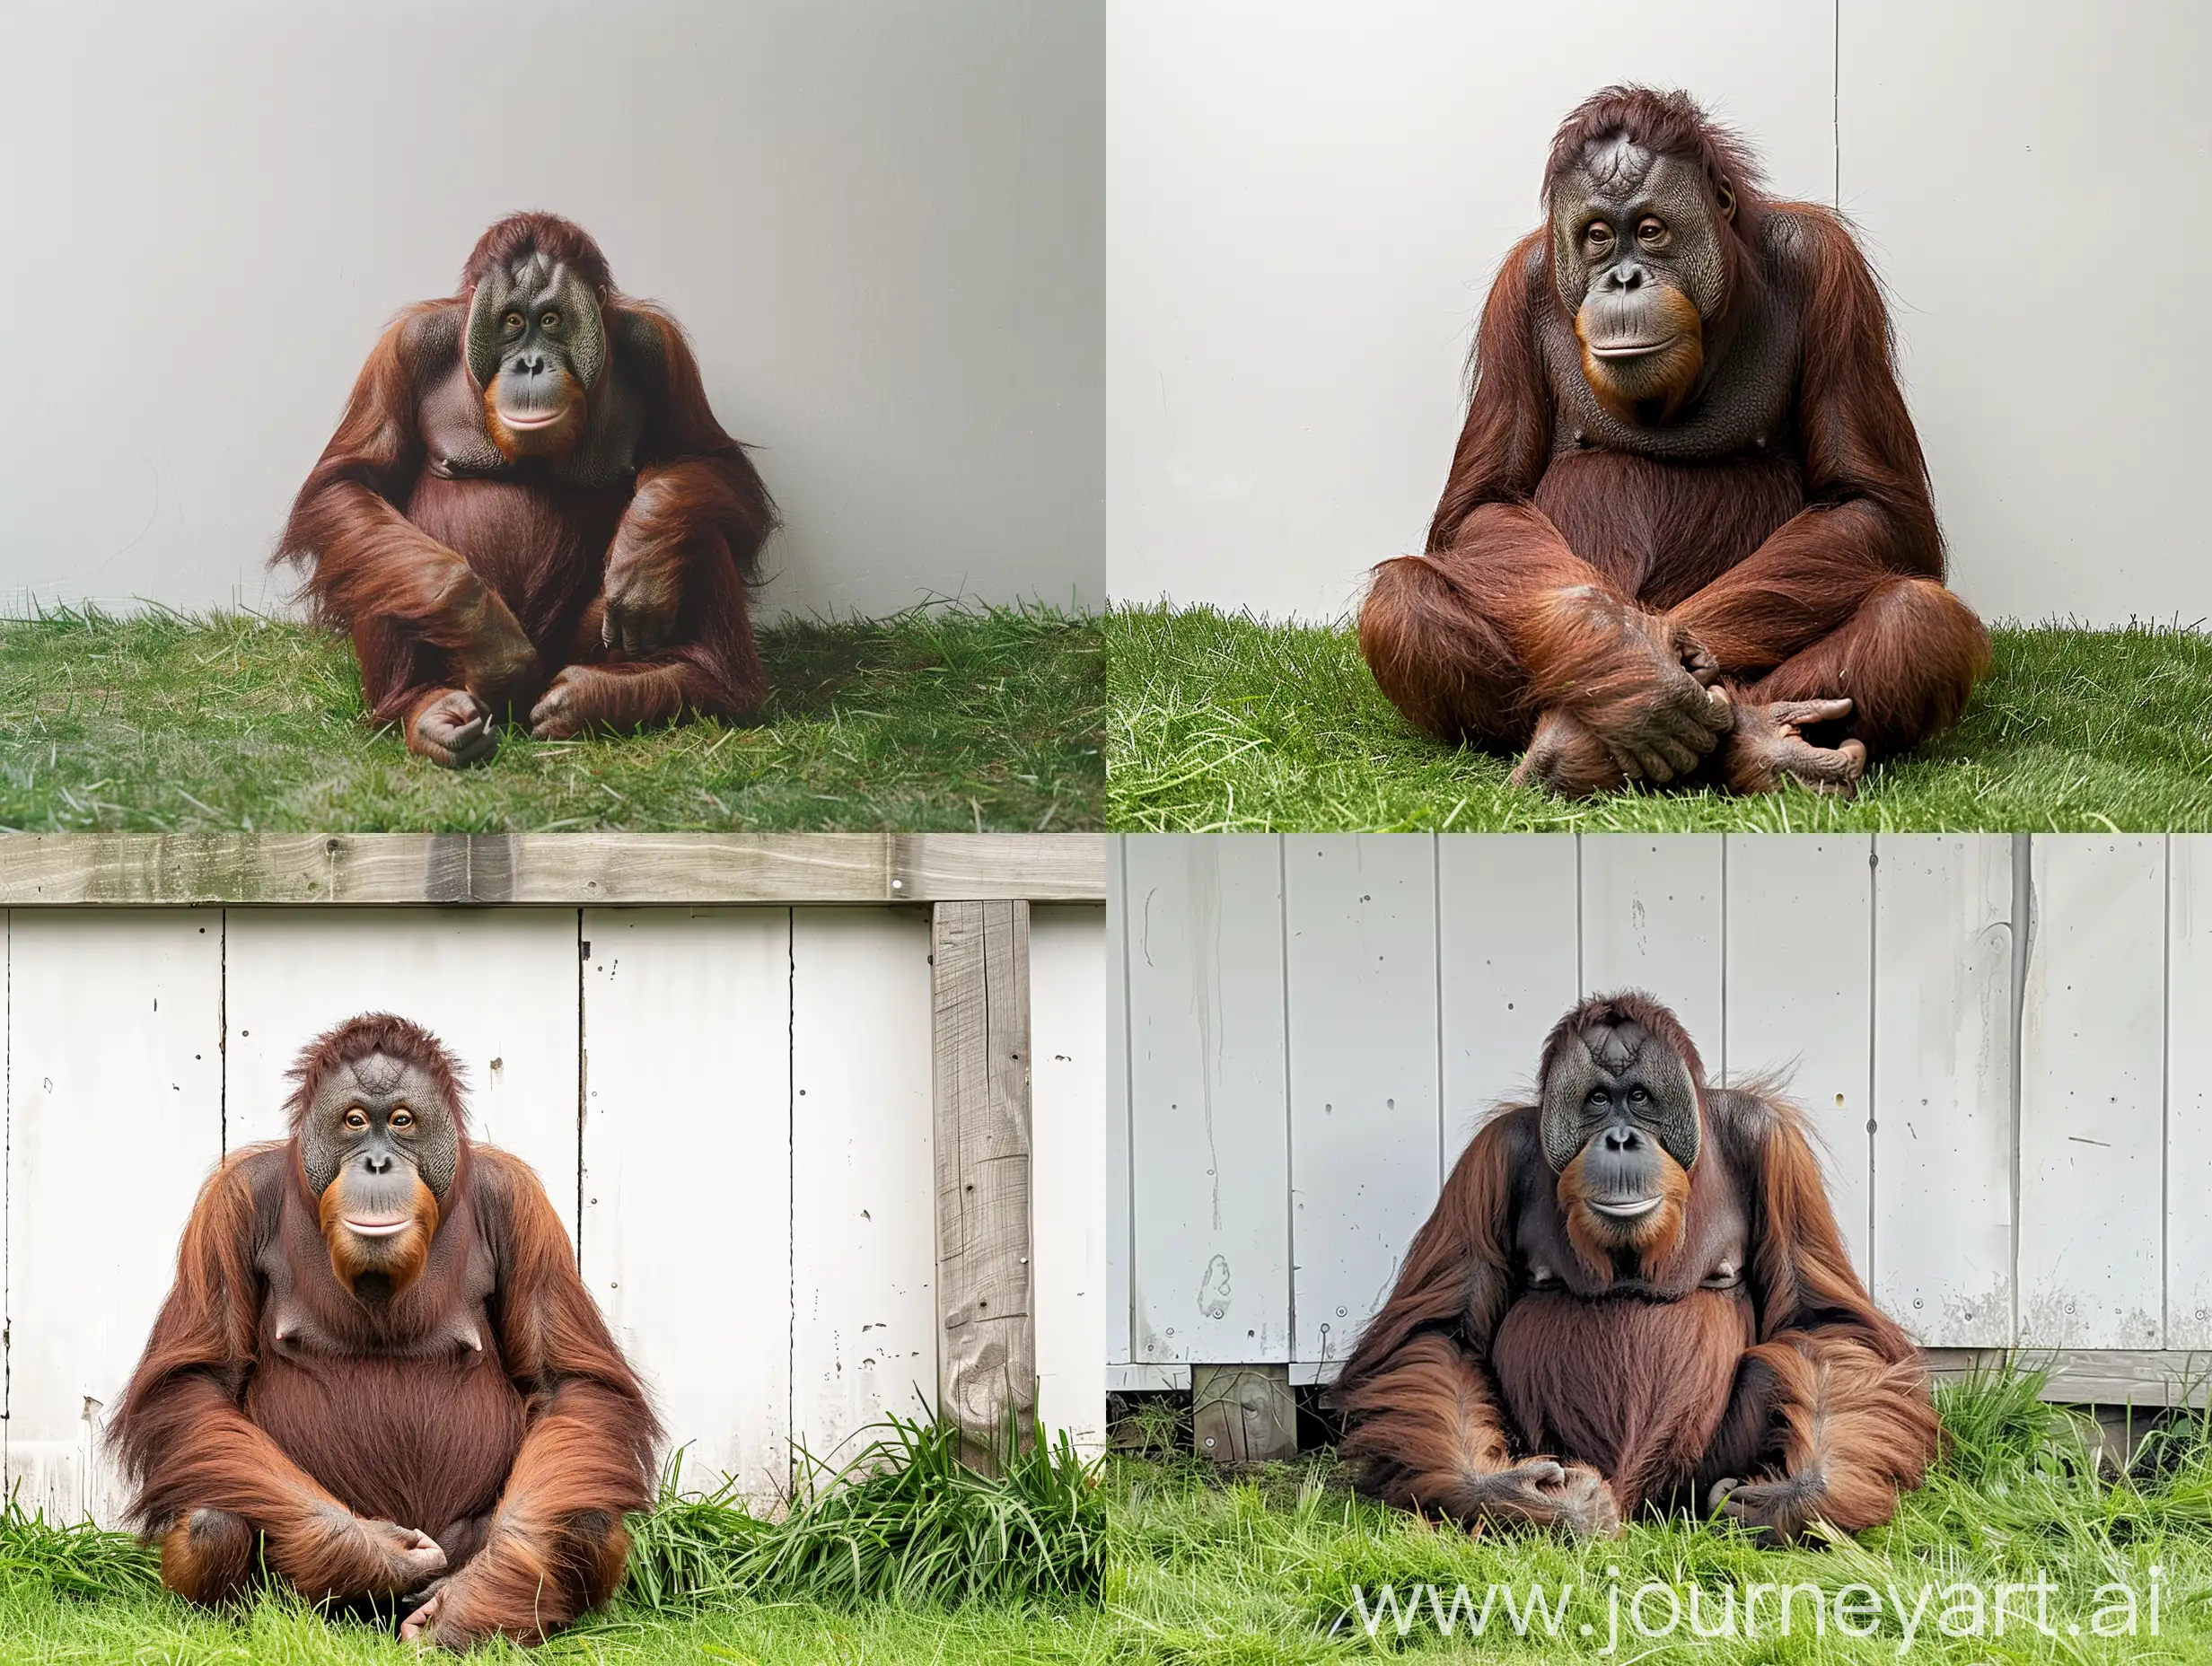 An orangutan sitting on grass in front ofna white wall, hyper-realistic